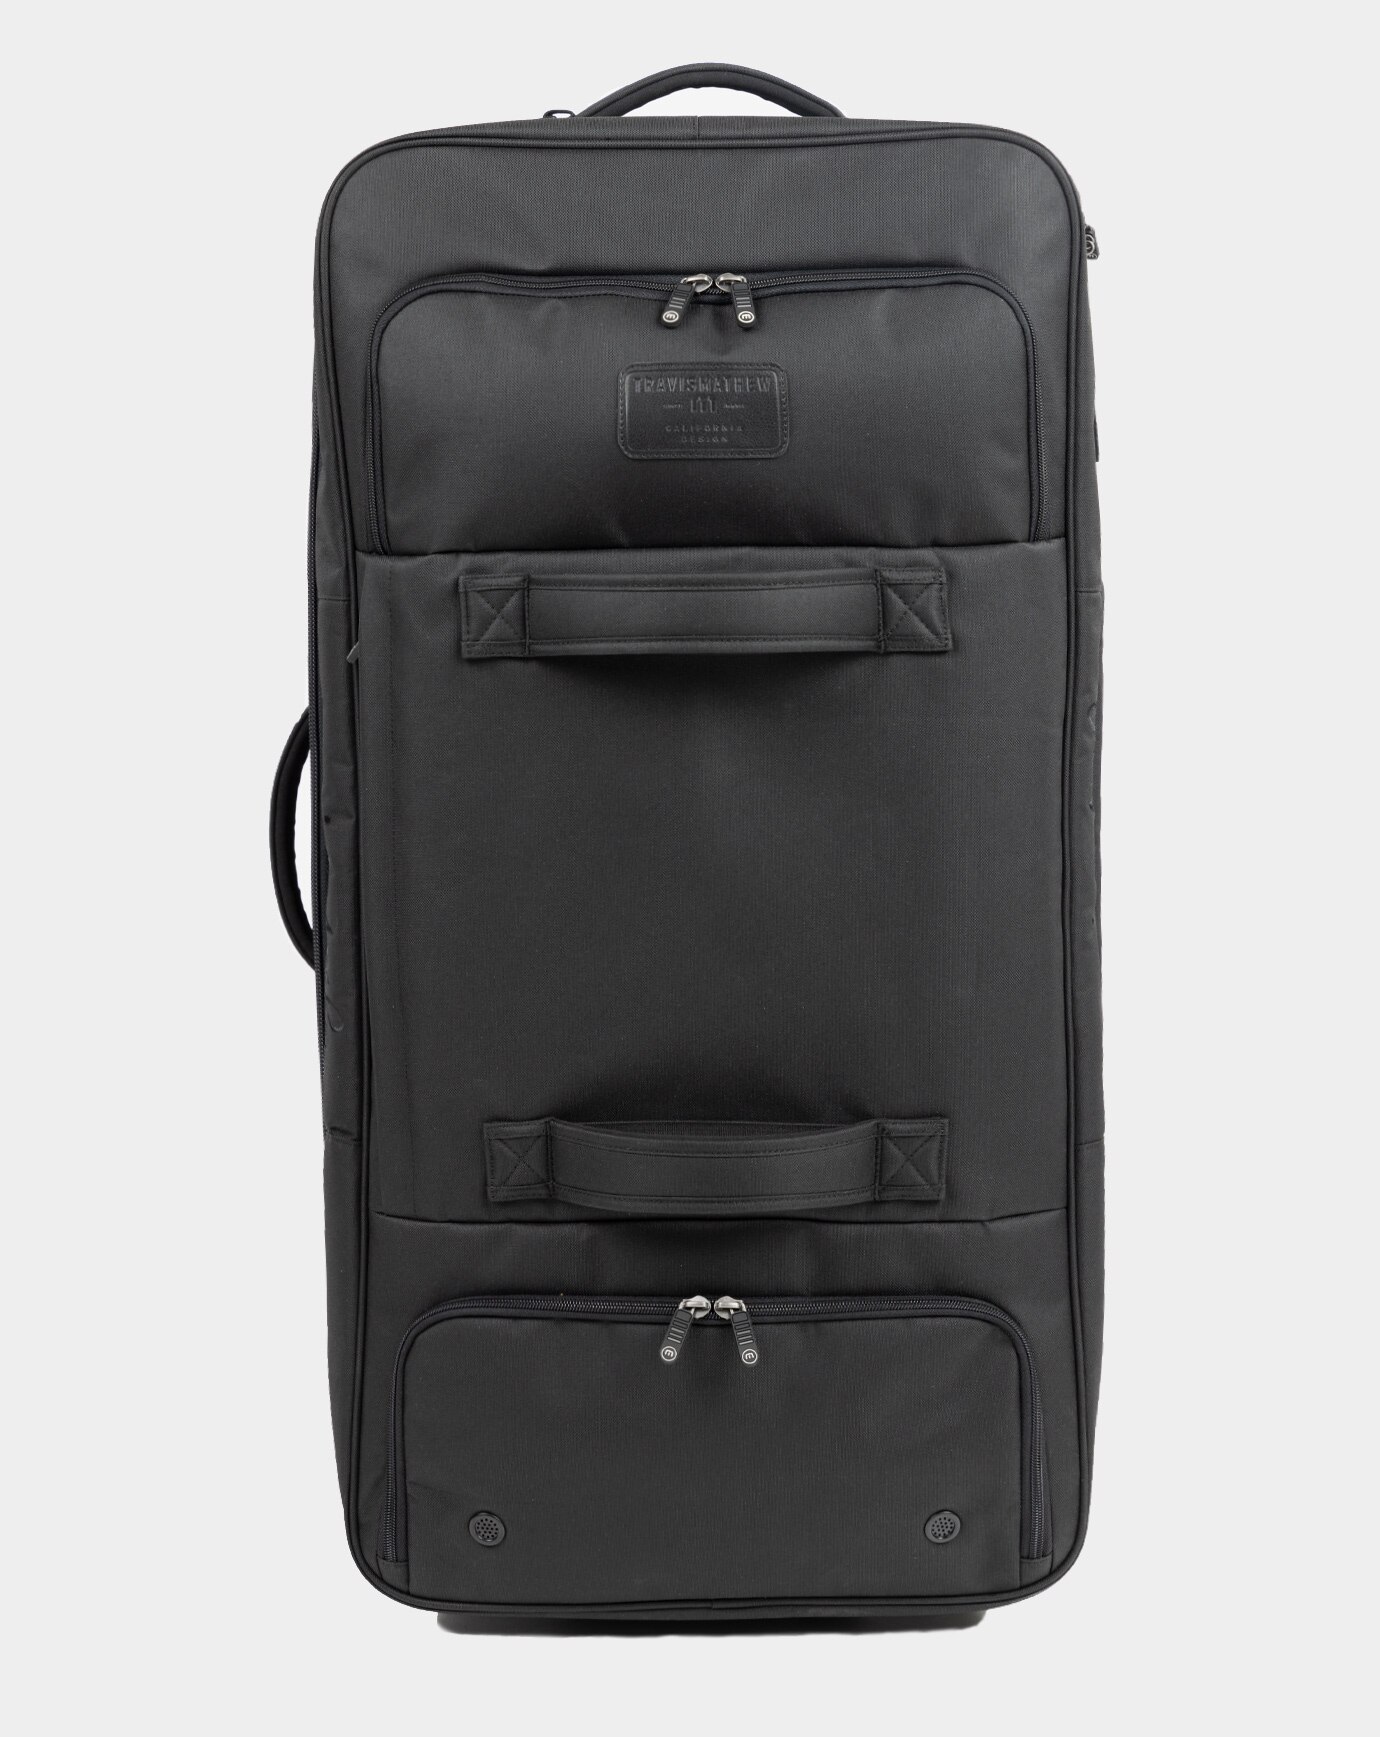 EXPRESS 2.0 SUITCASE 1